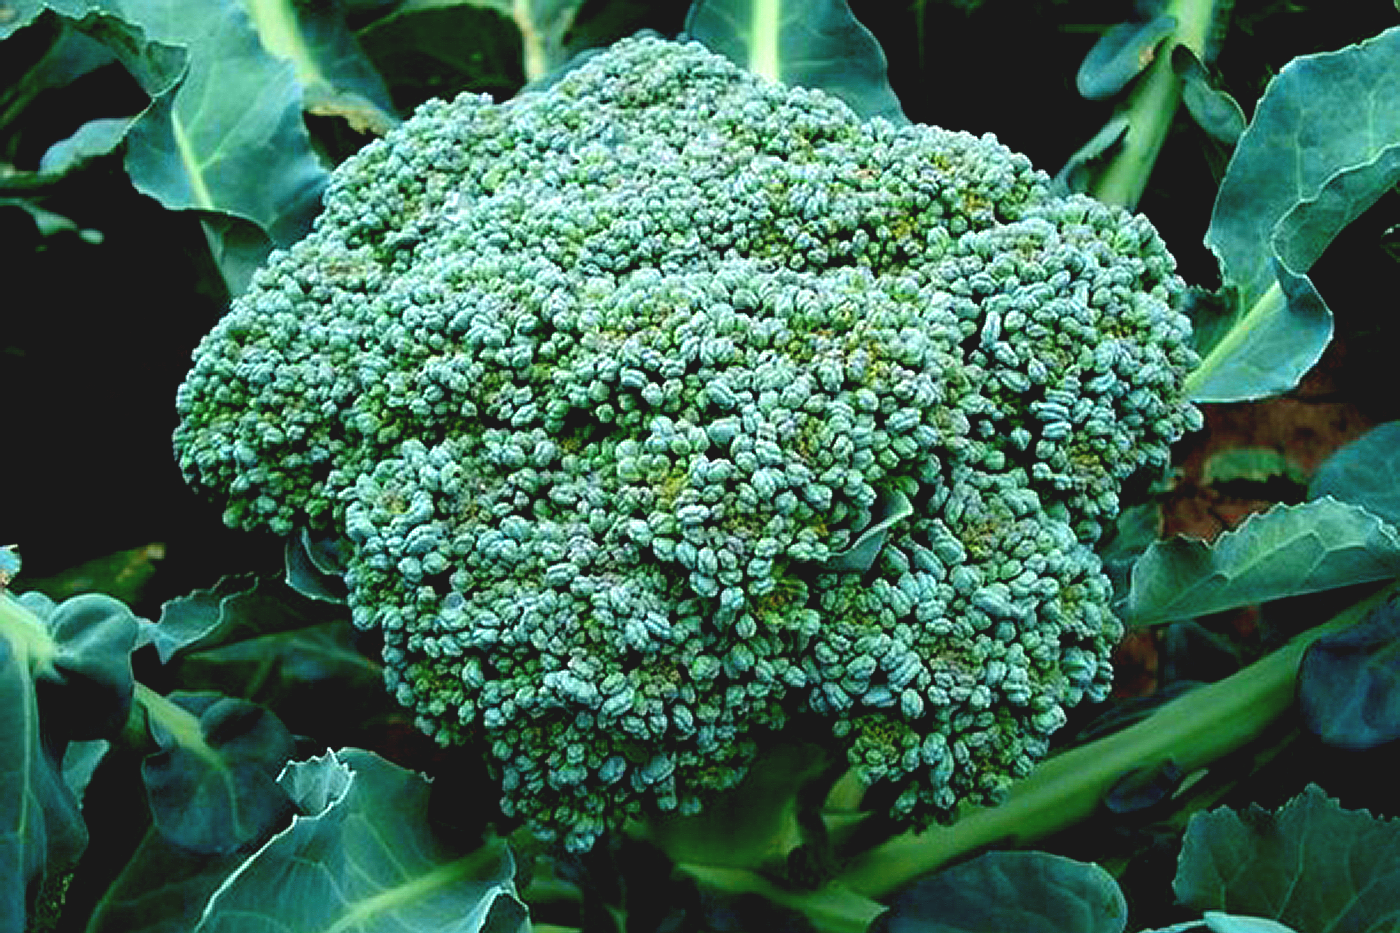 head of broccoli with attached greens